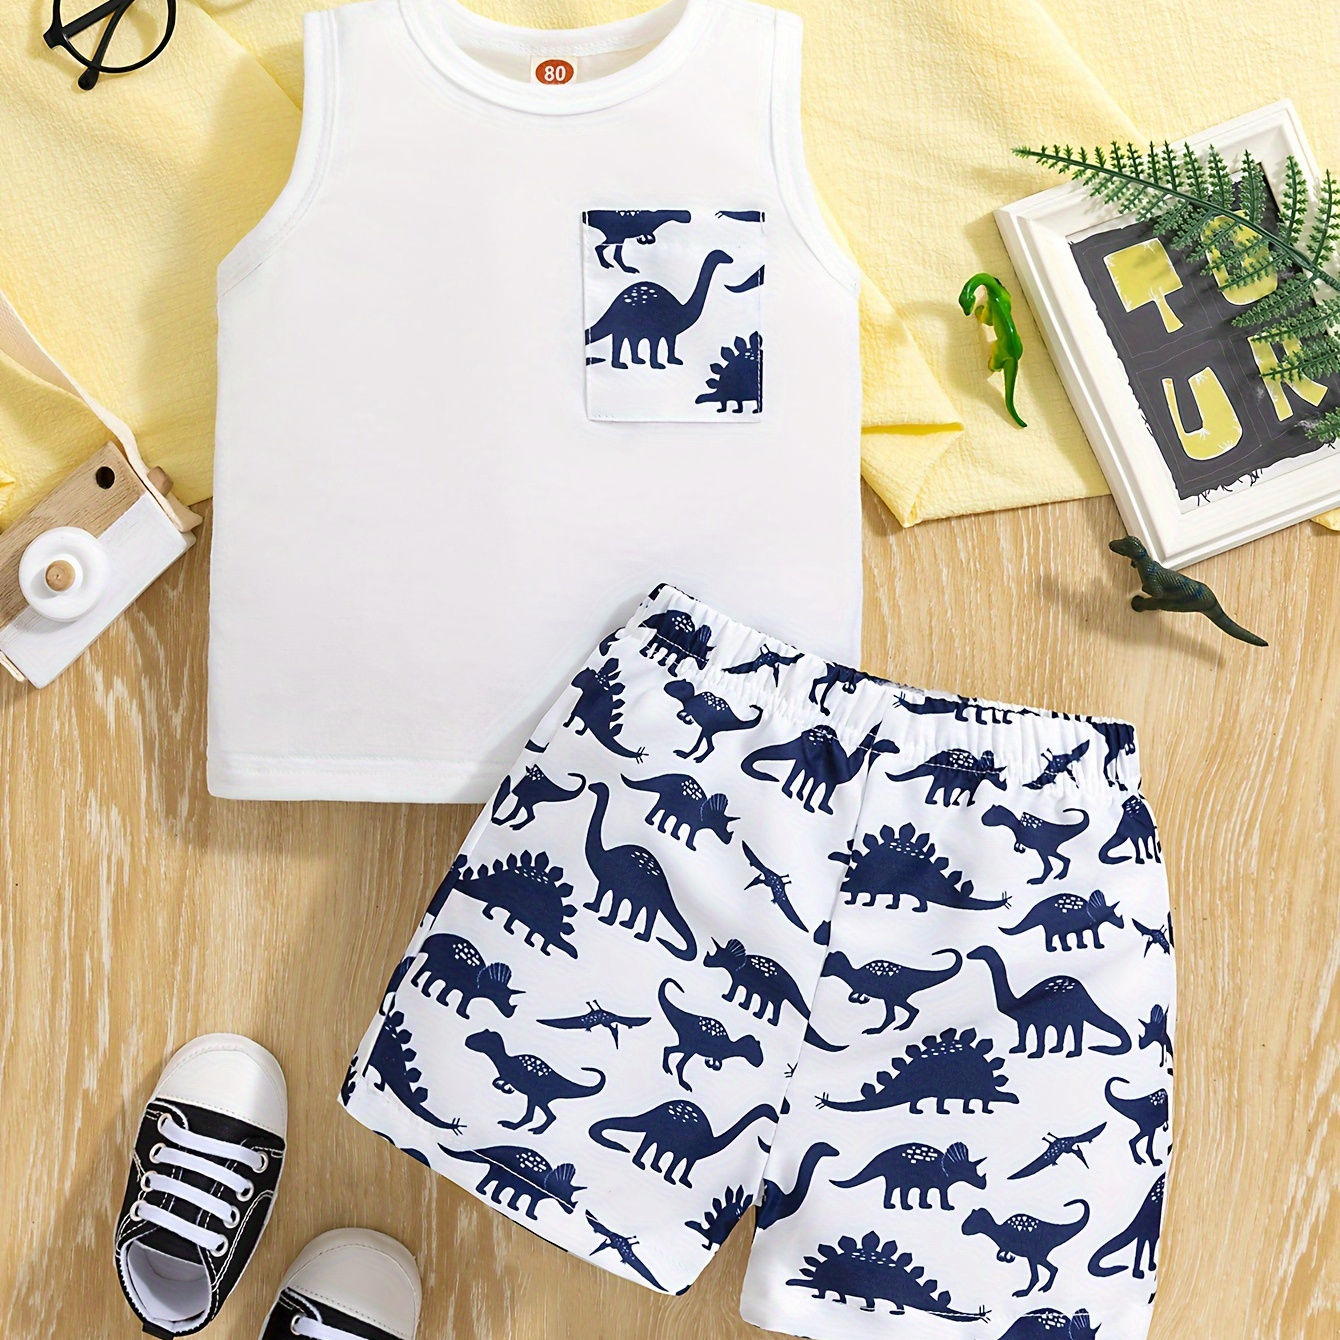 

Baby's Cartoon Dinosaur Print 2pcs Summer Casual Outfit, Pocket Patched Tank Top & Full Print Shorts Set, Toddler & Infant Boy's Clothes